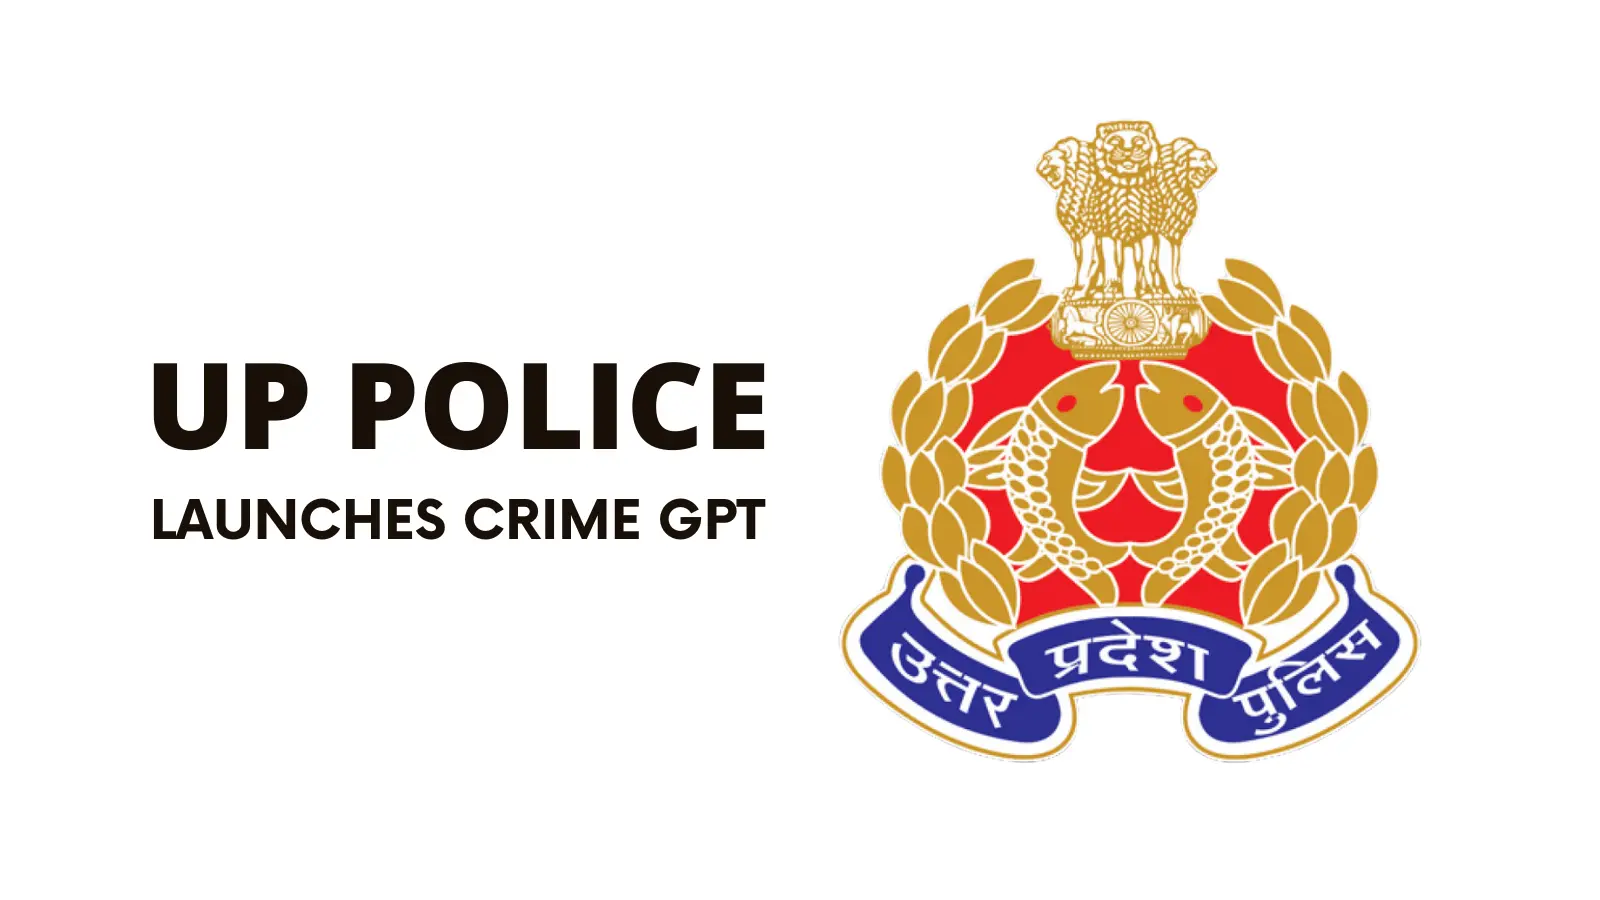 UP Police Launches Crime GPT